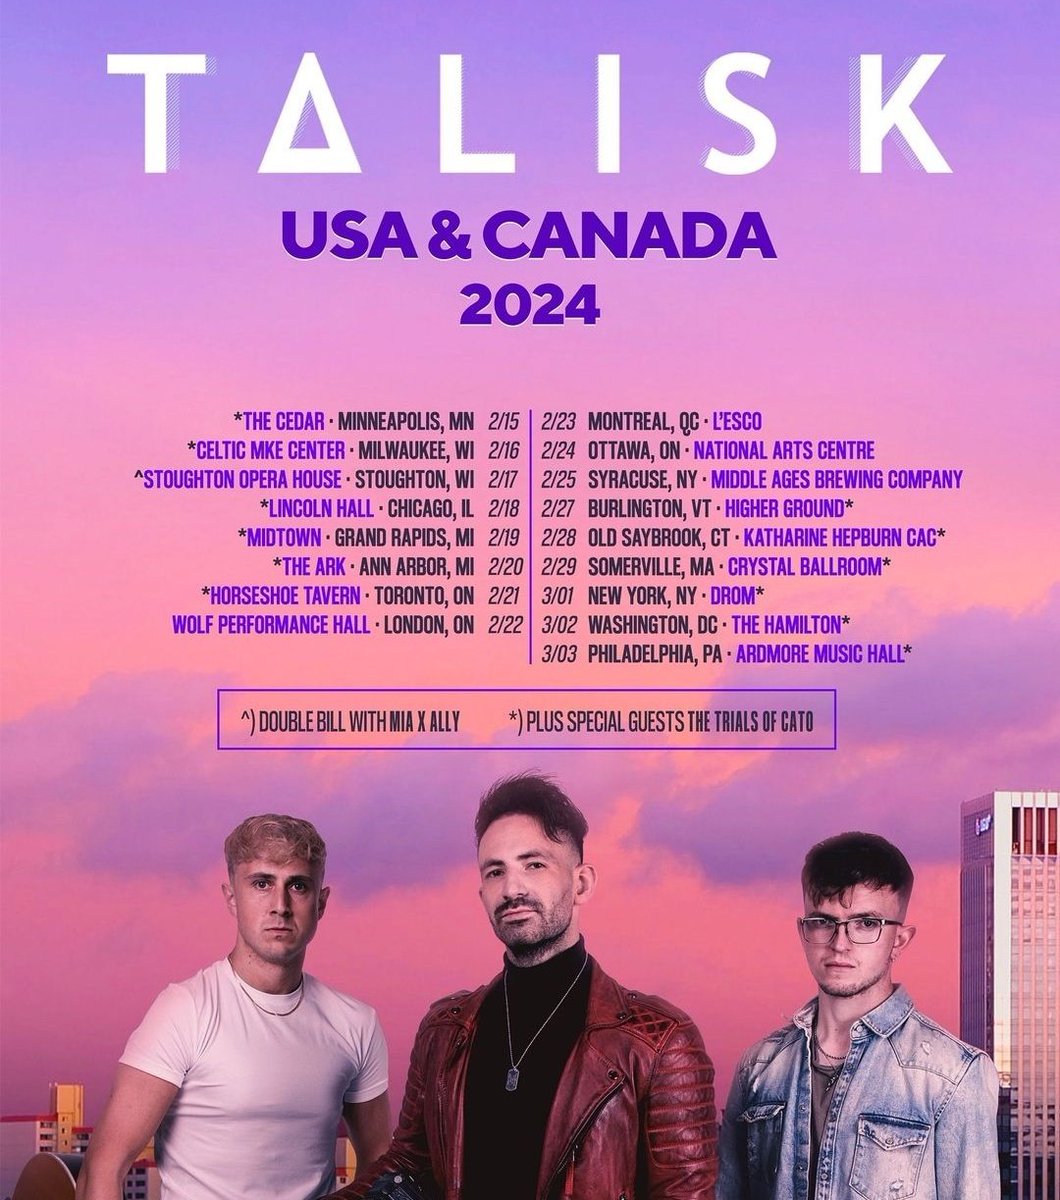 Scottish folk greats @TaliskMusic will kick off their USA and Canada tour tonight in Minneapolis! 🇺🇲🏴󠁧󠁢󠁳󠁣󠁴󠁿🇨🇦 Check out the rest of their dates and buy tickets here ⬇️🎶 talisk.co.uk/gigs/